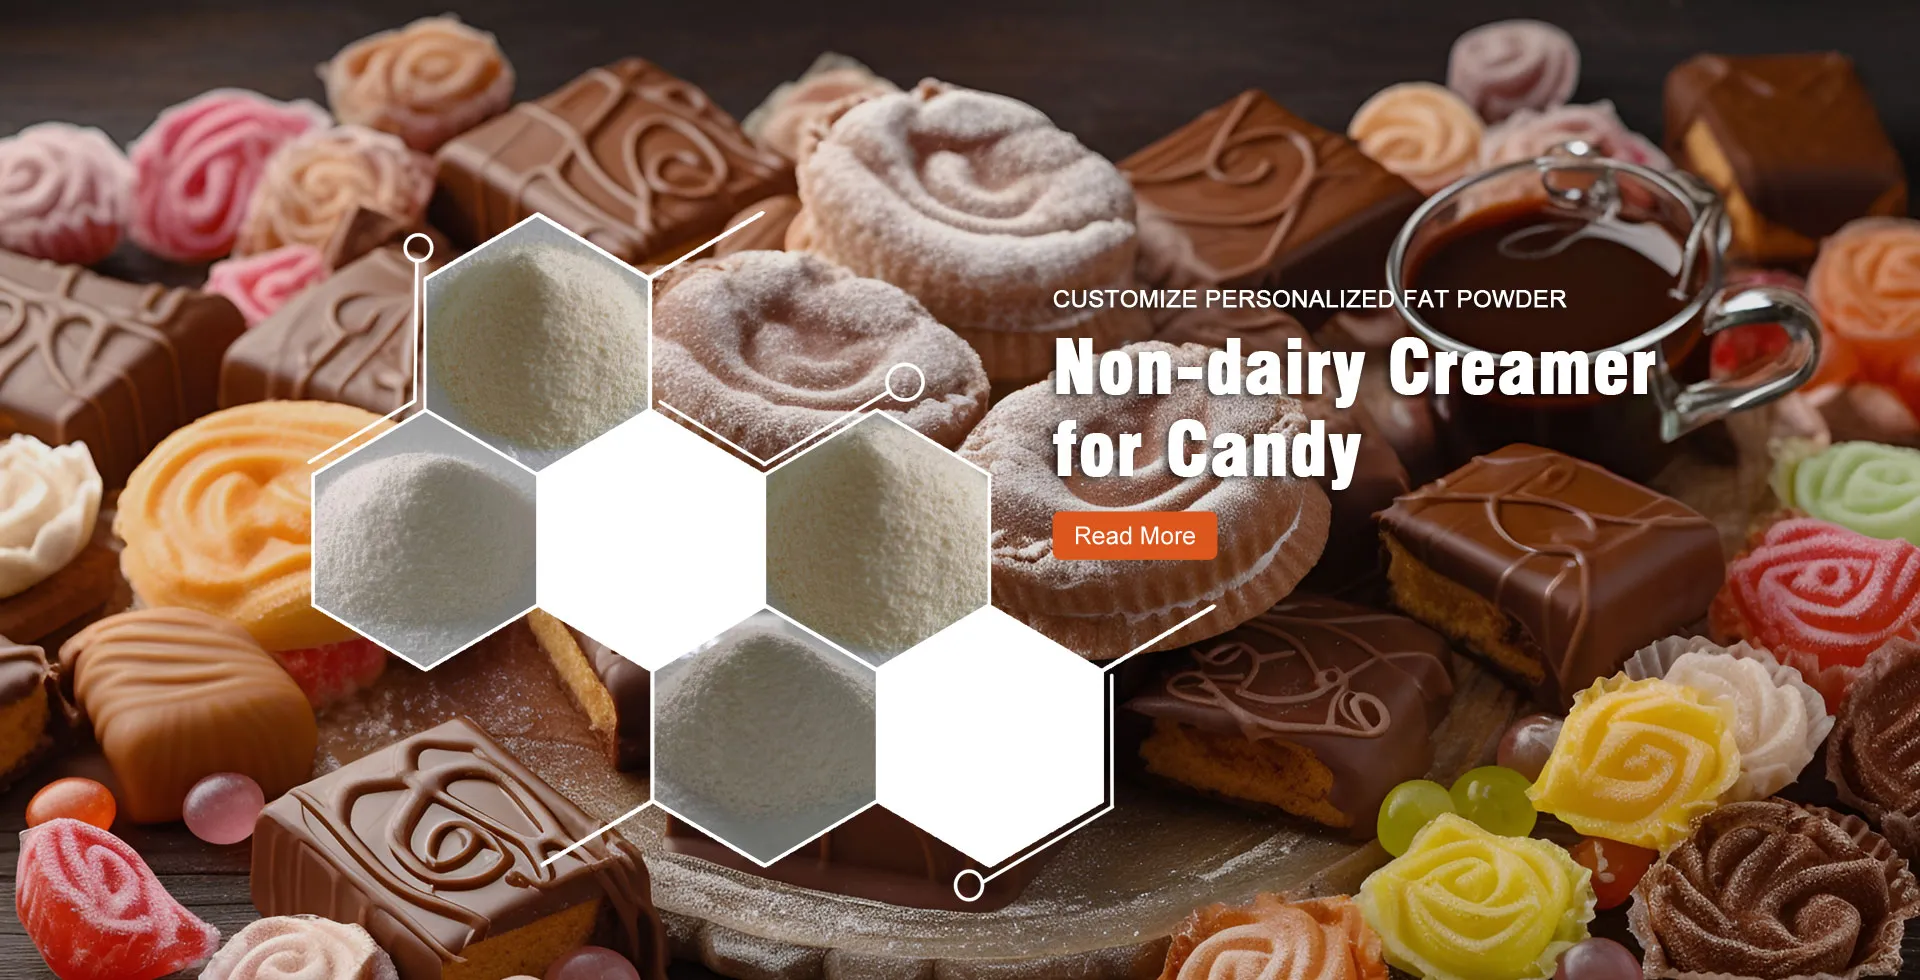 Non-dairy Creamer for Candy Manufacturer